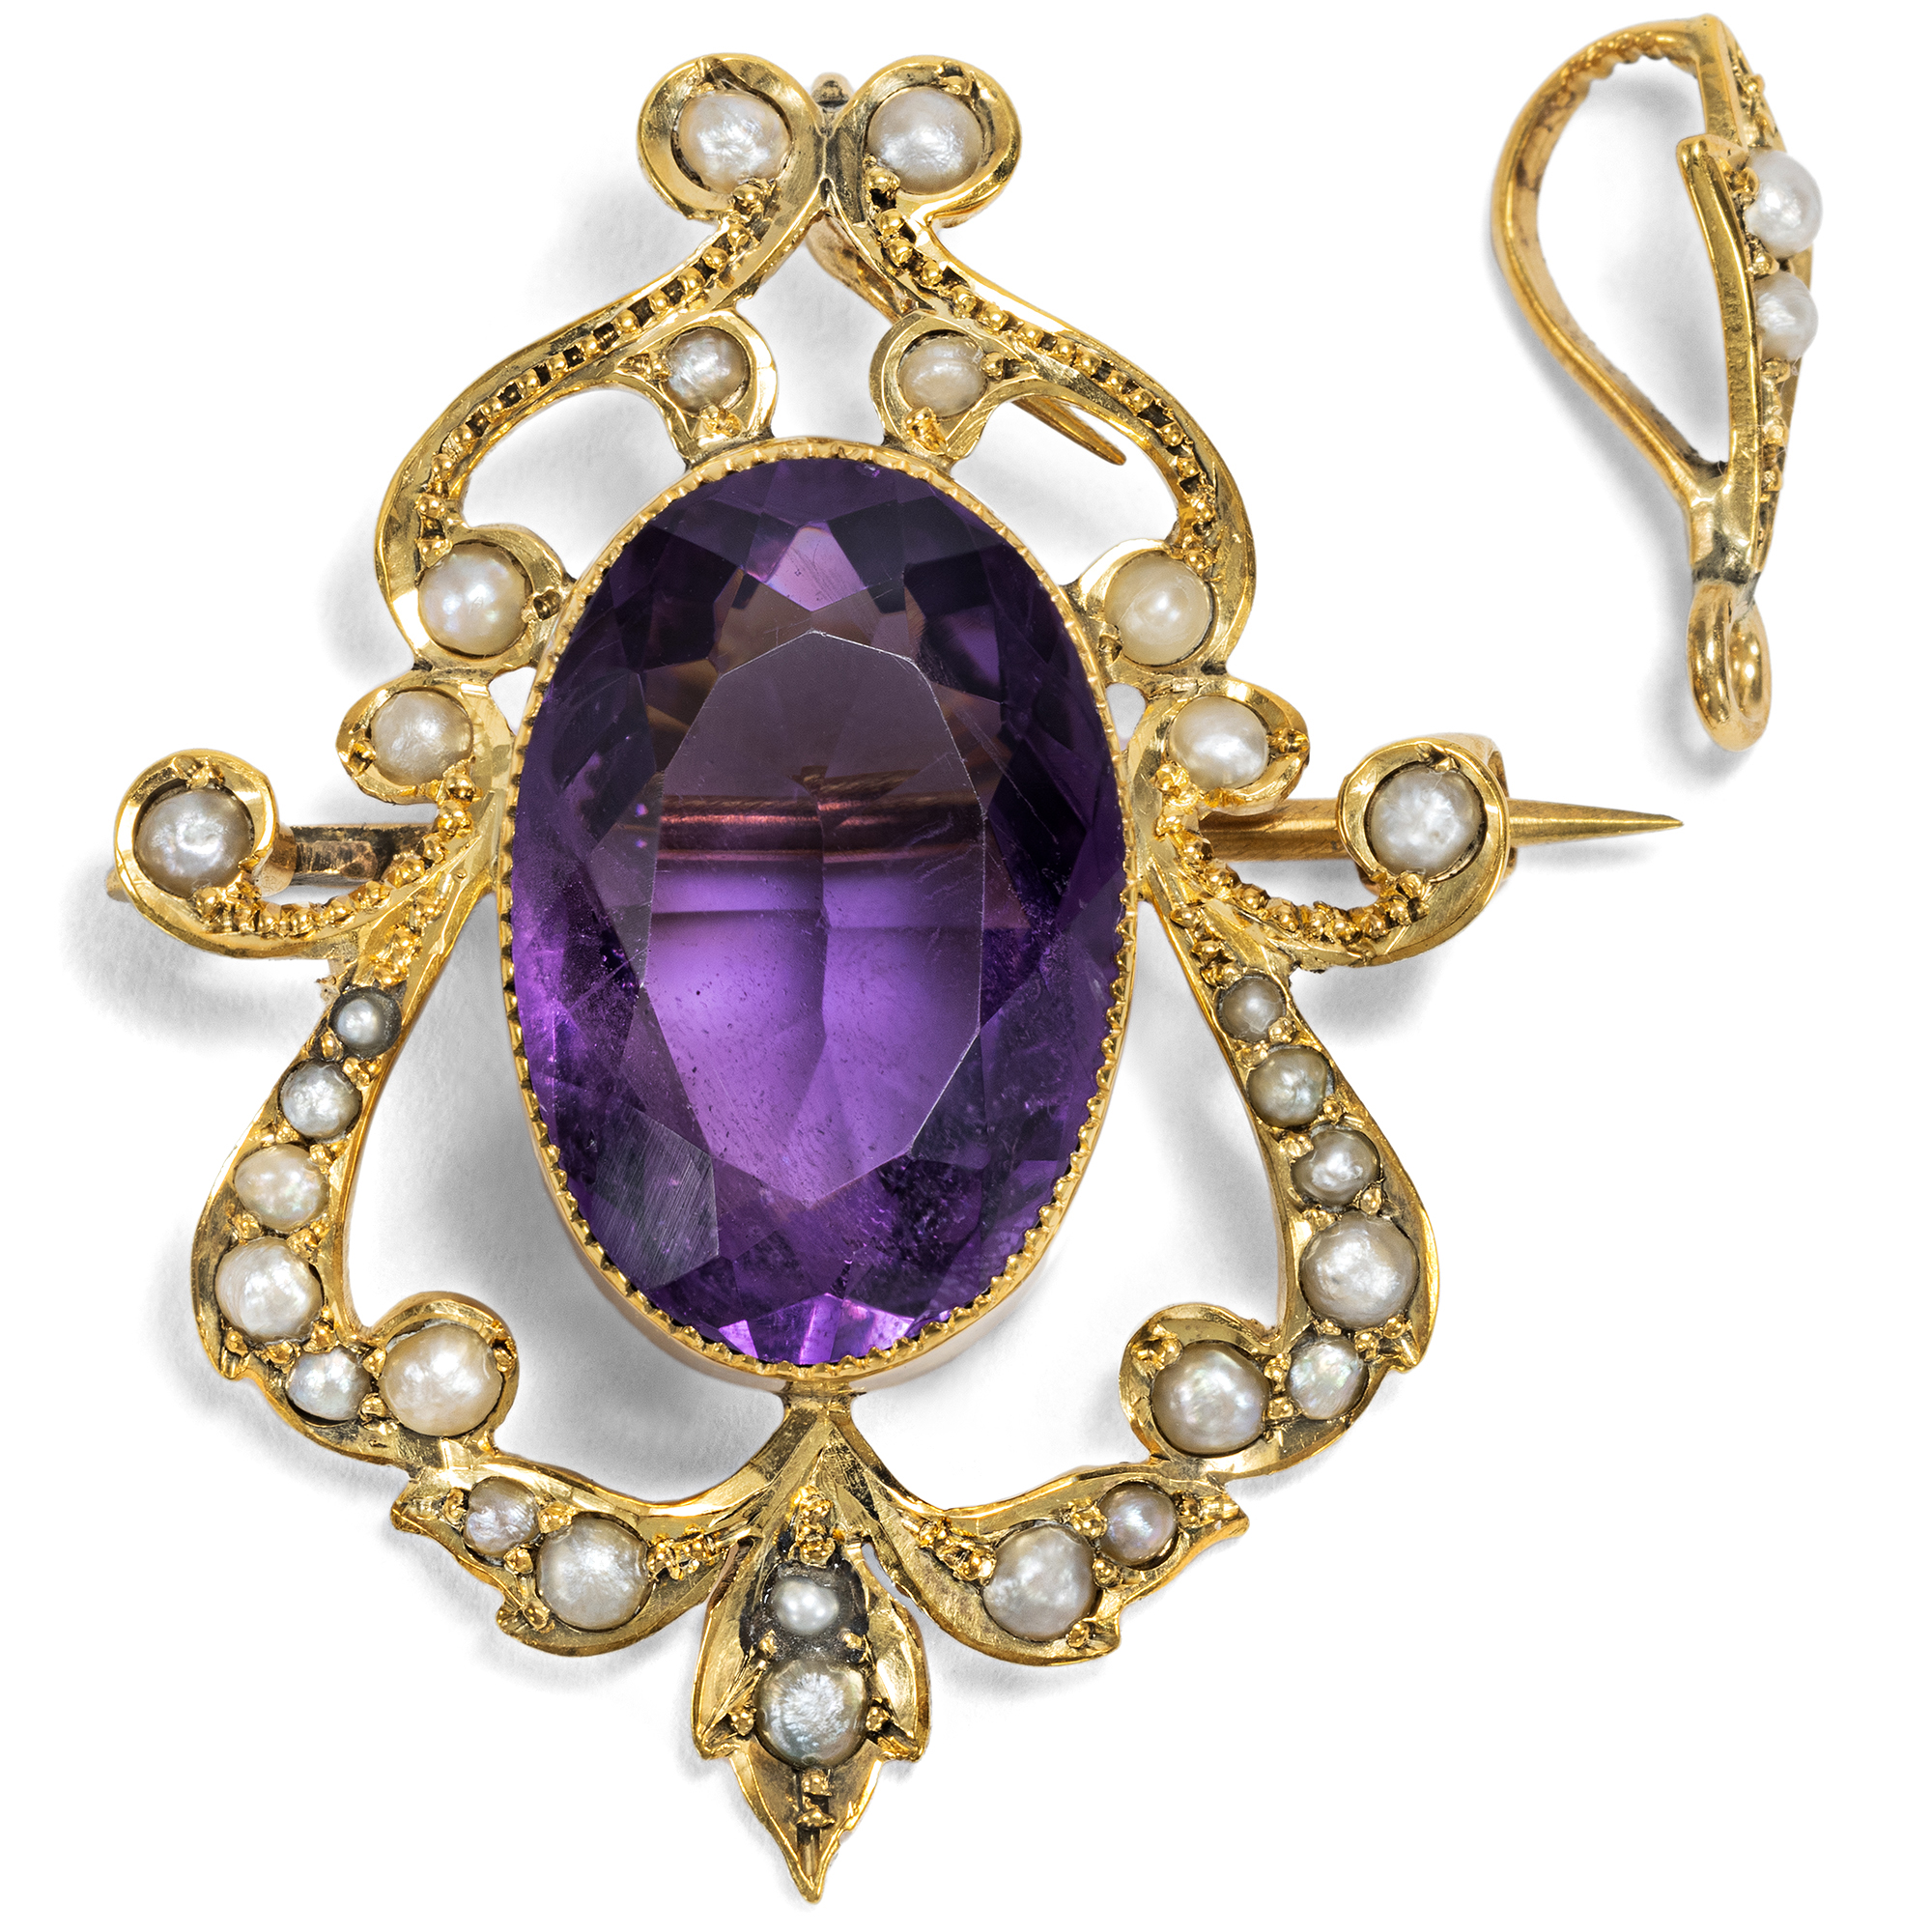 Antique pendant brooch with amethysts & pearls in gold, circa 1905